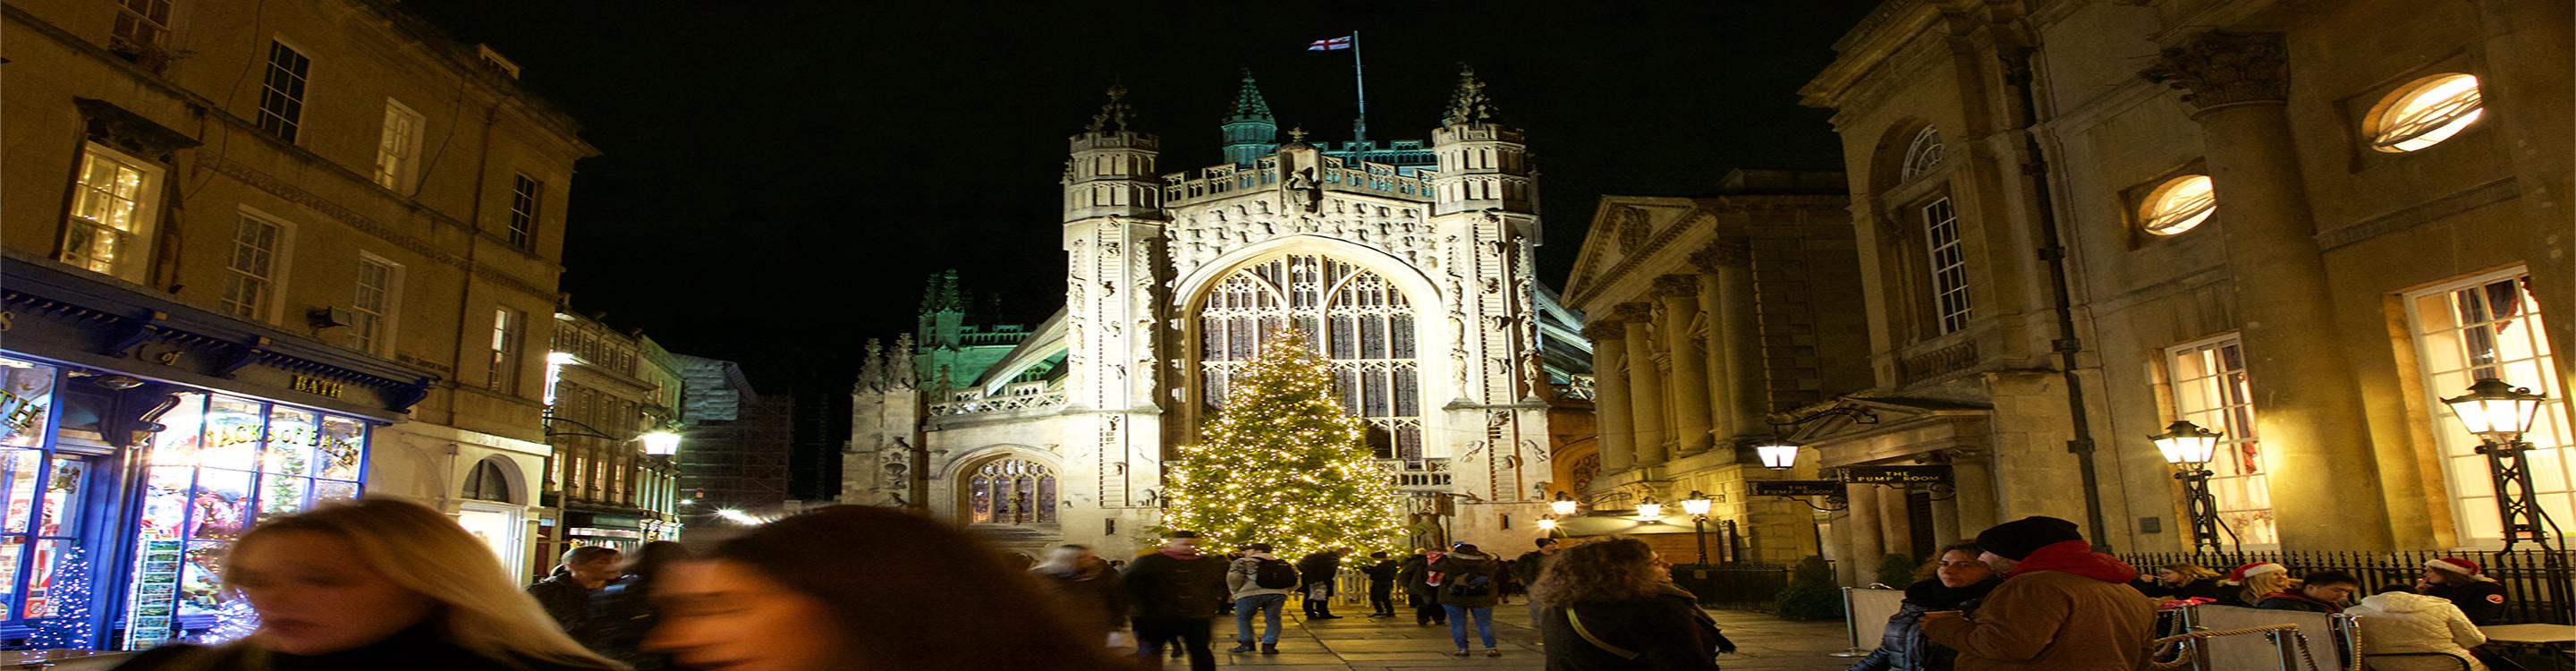 Shoppers in front of Bath Abbey during Christmas time at night